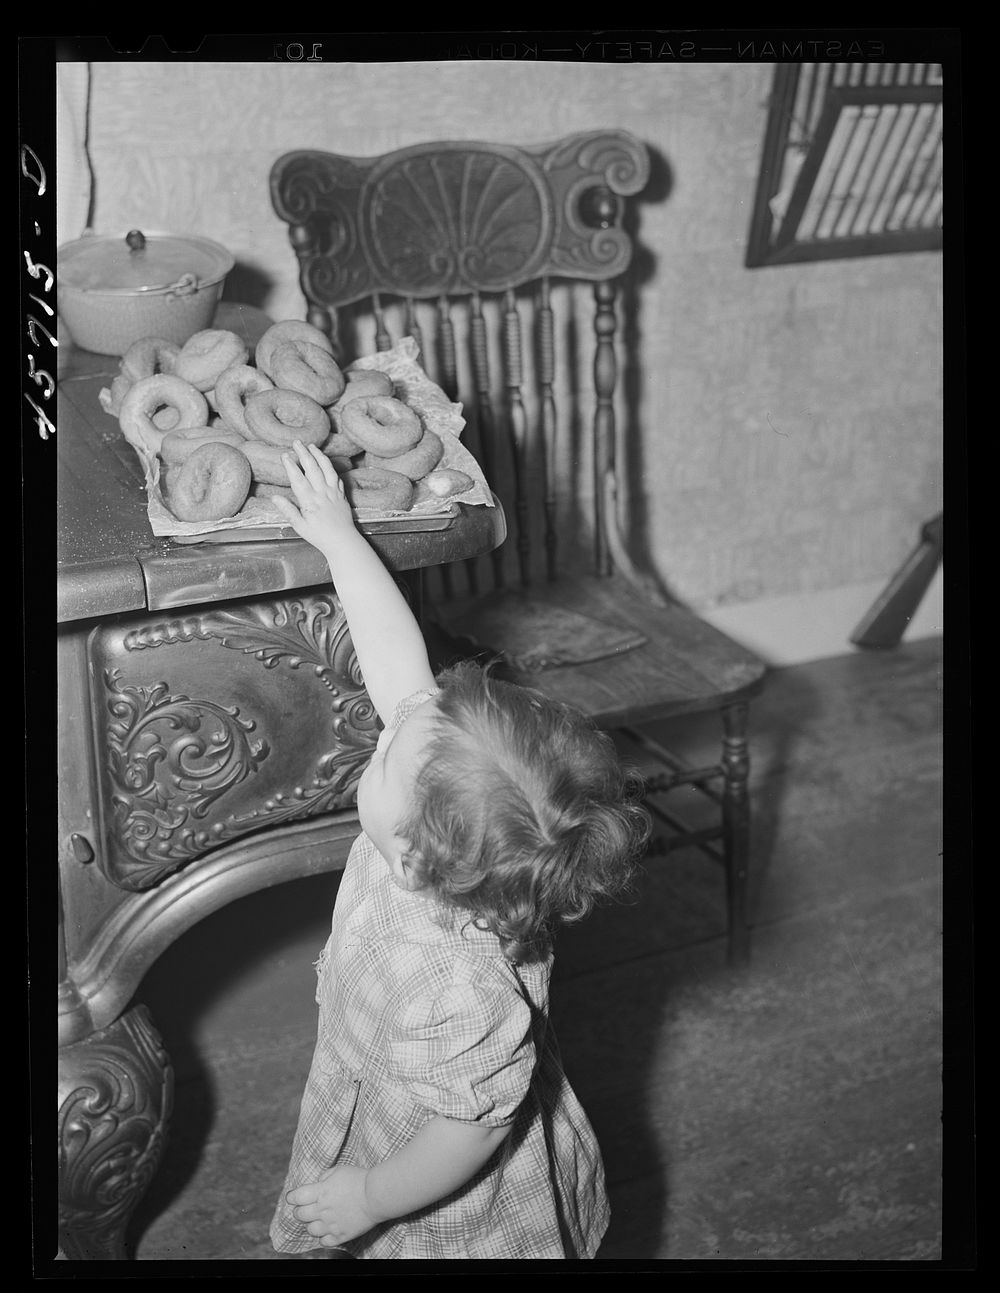 "Sister" reaching for some doughnuts at the Gaynor home near Fairfield, Vermont. Sourced from the Library of Congress.